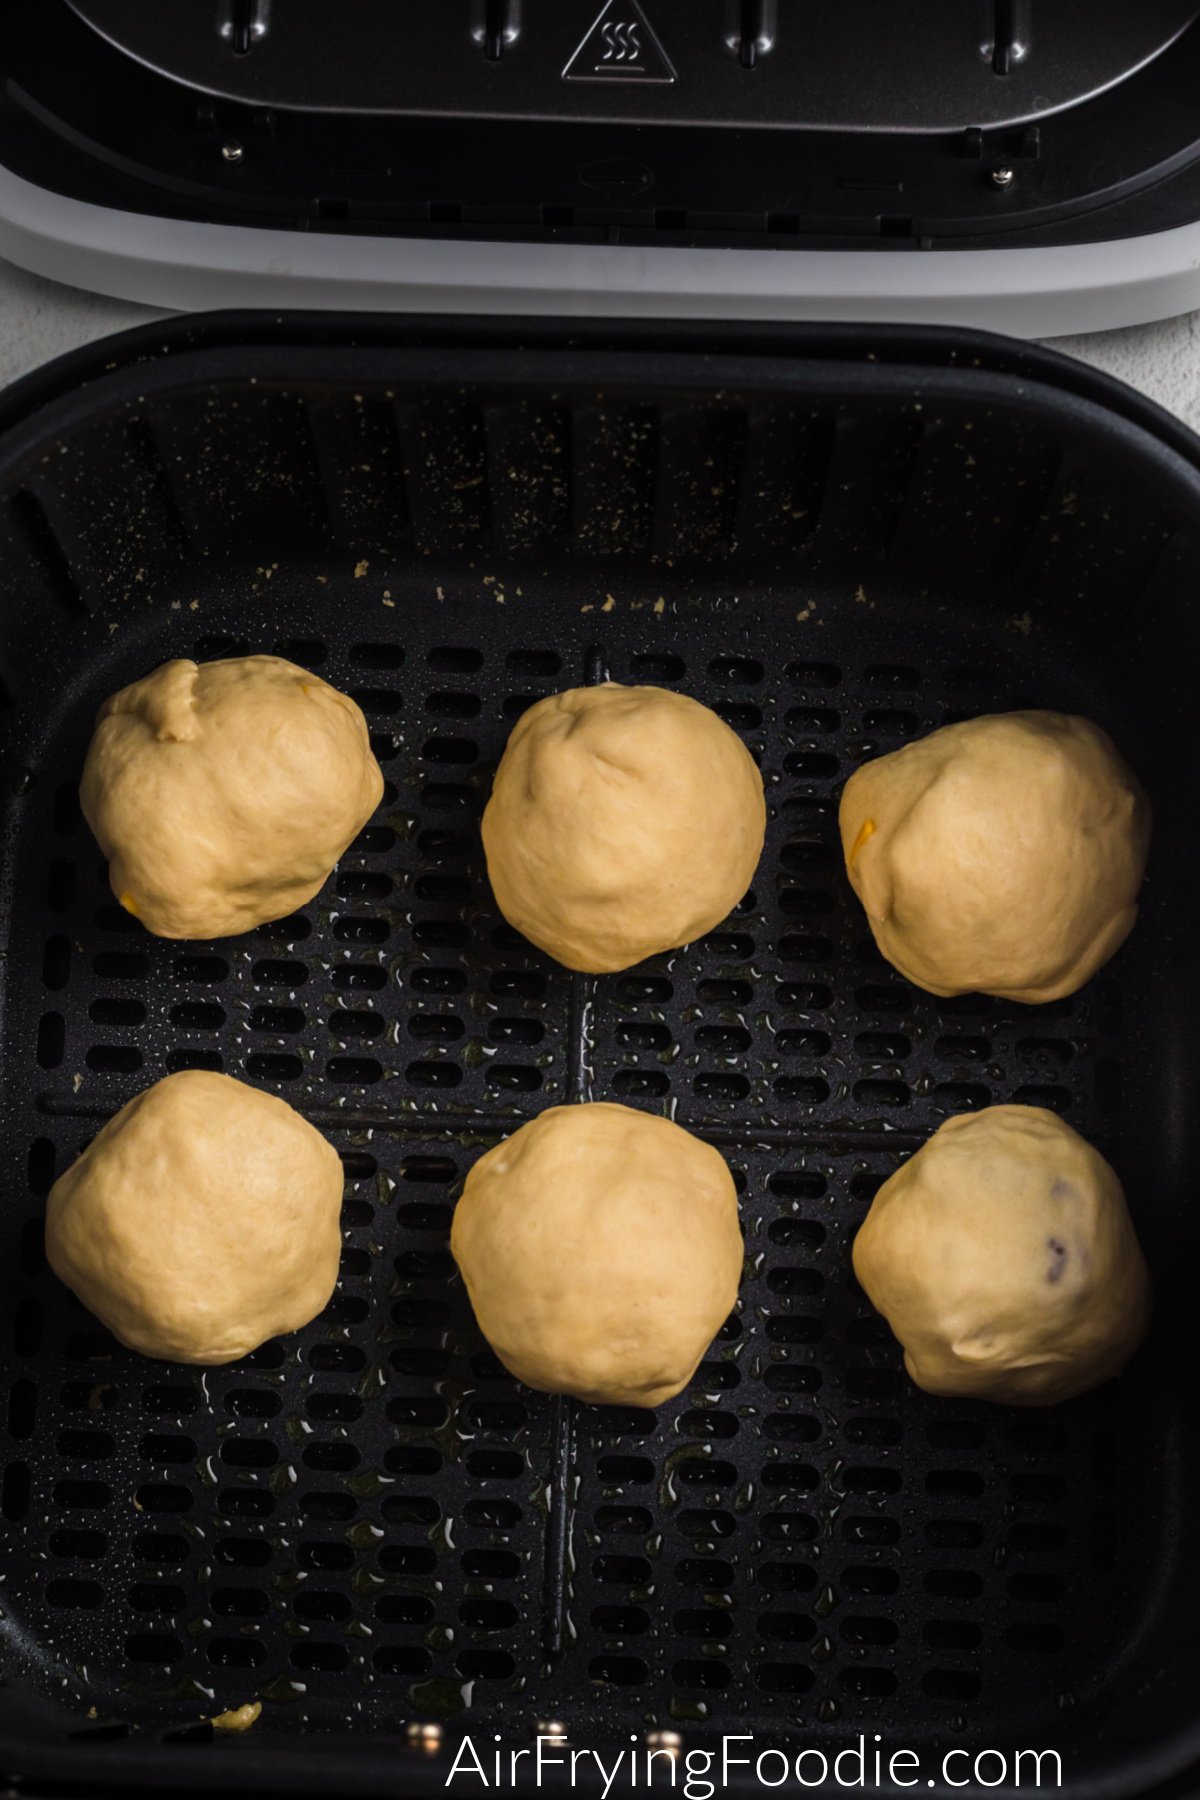 Cheeseburger balls in the basket of the air fryer ready to be cooked.